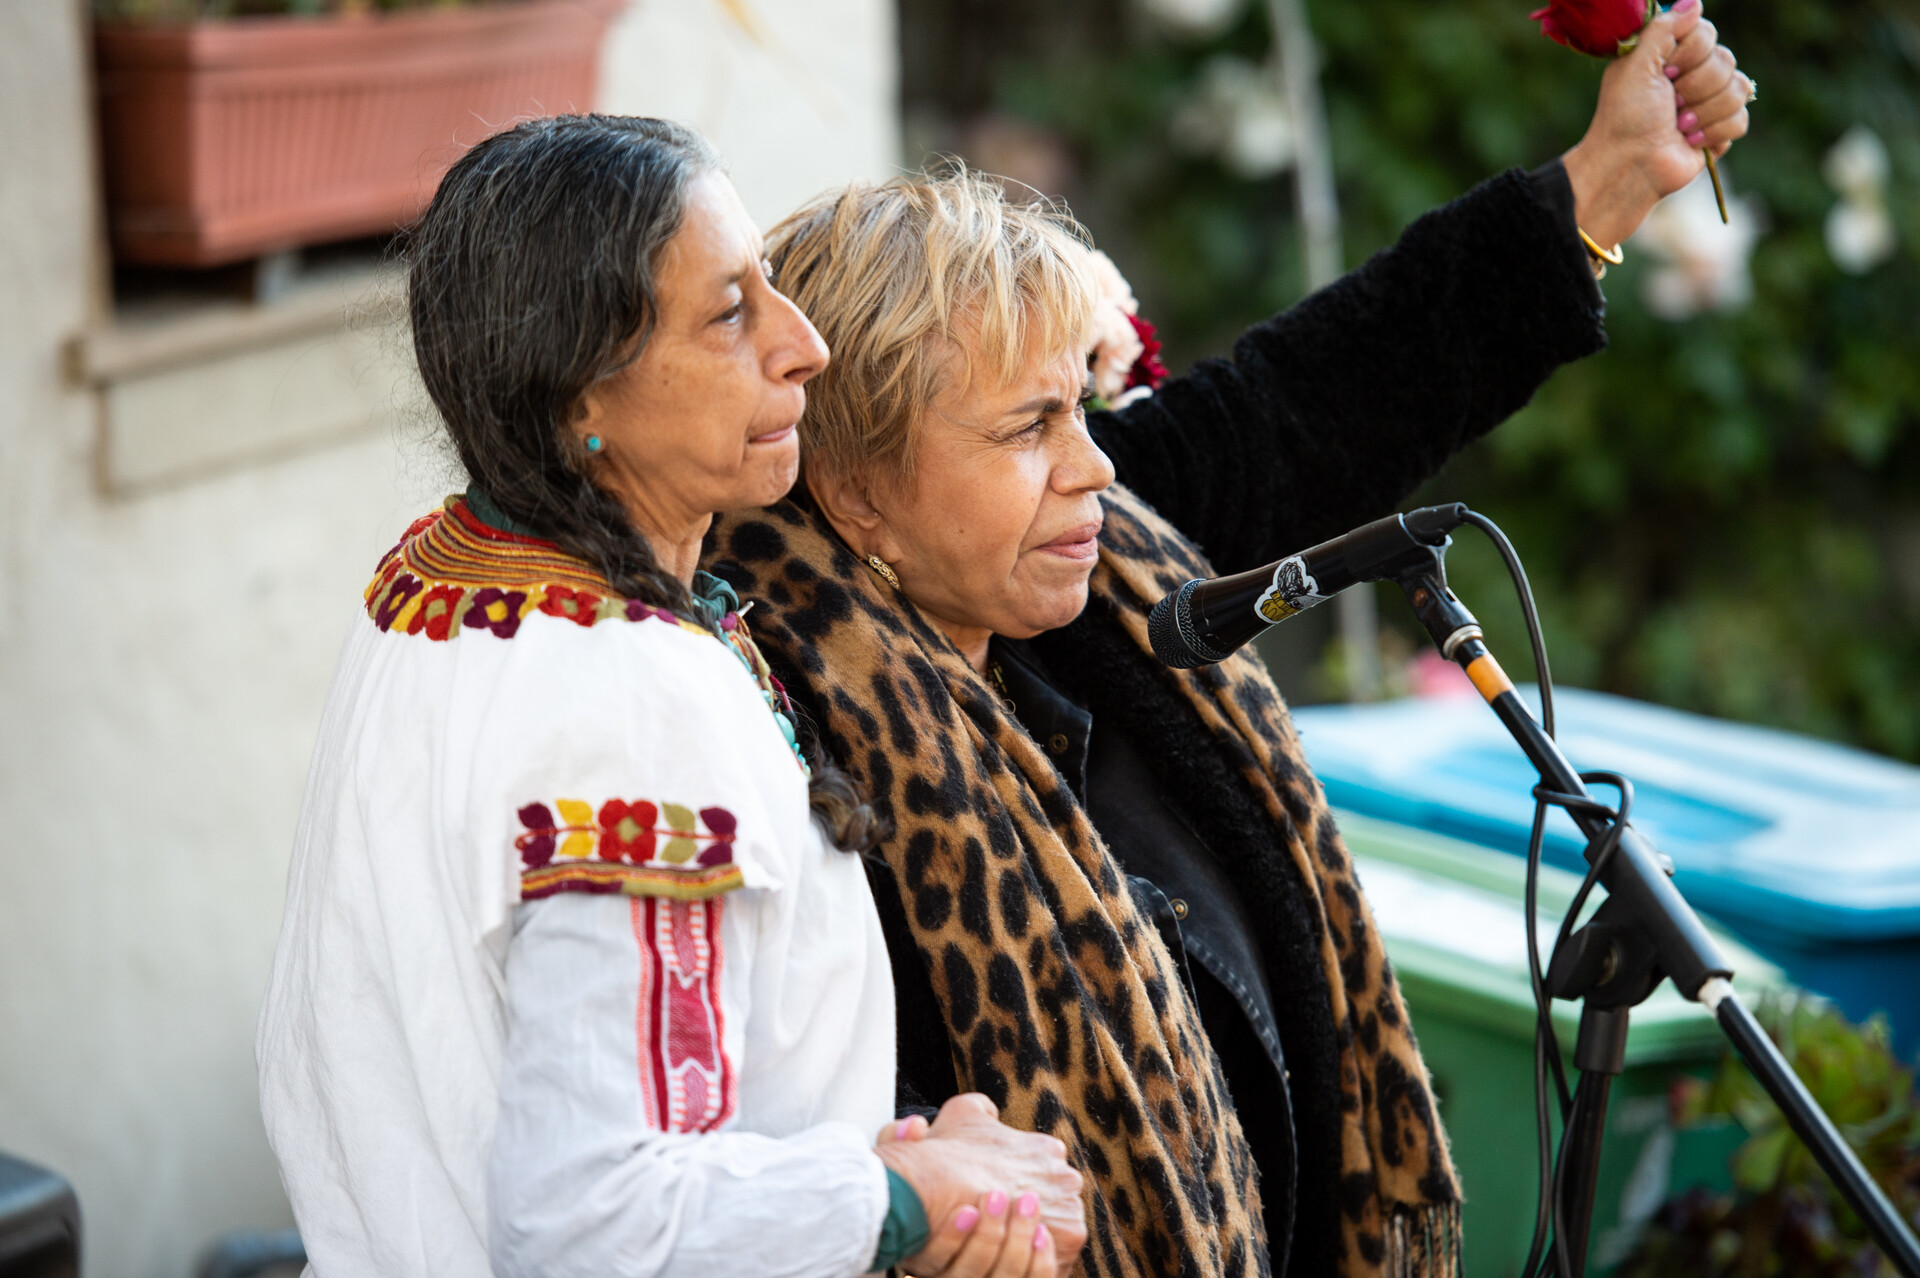 Two women stand together in front of a microphone. One woman wearing a leopard print jacket has her fist raised.